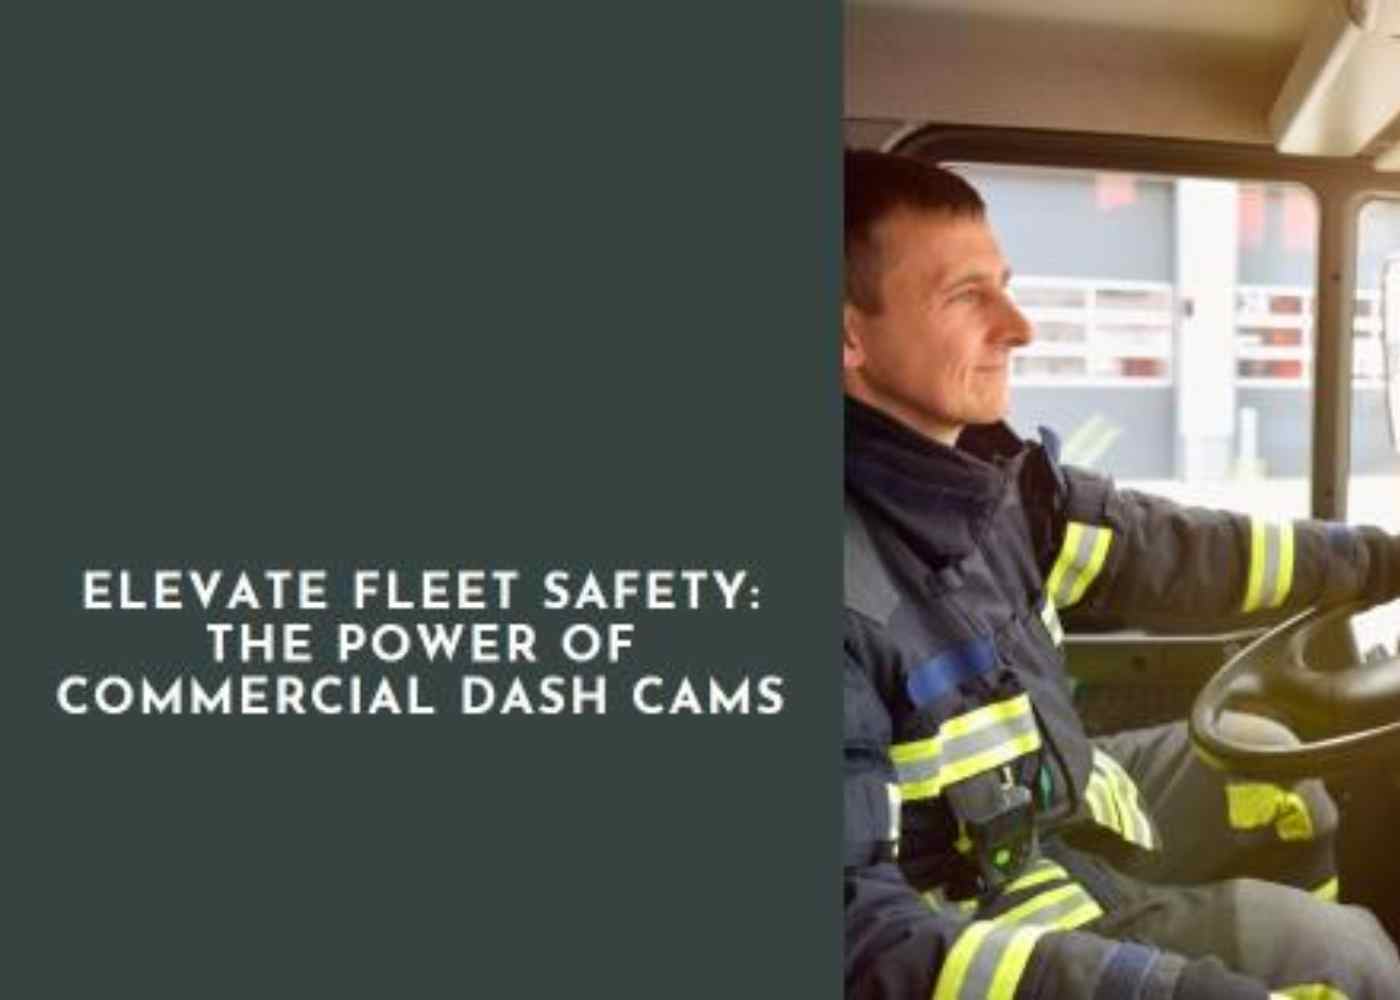 Elevate Fleet Safety: The Power of Commercial Dash Cams